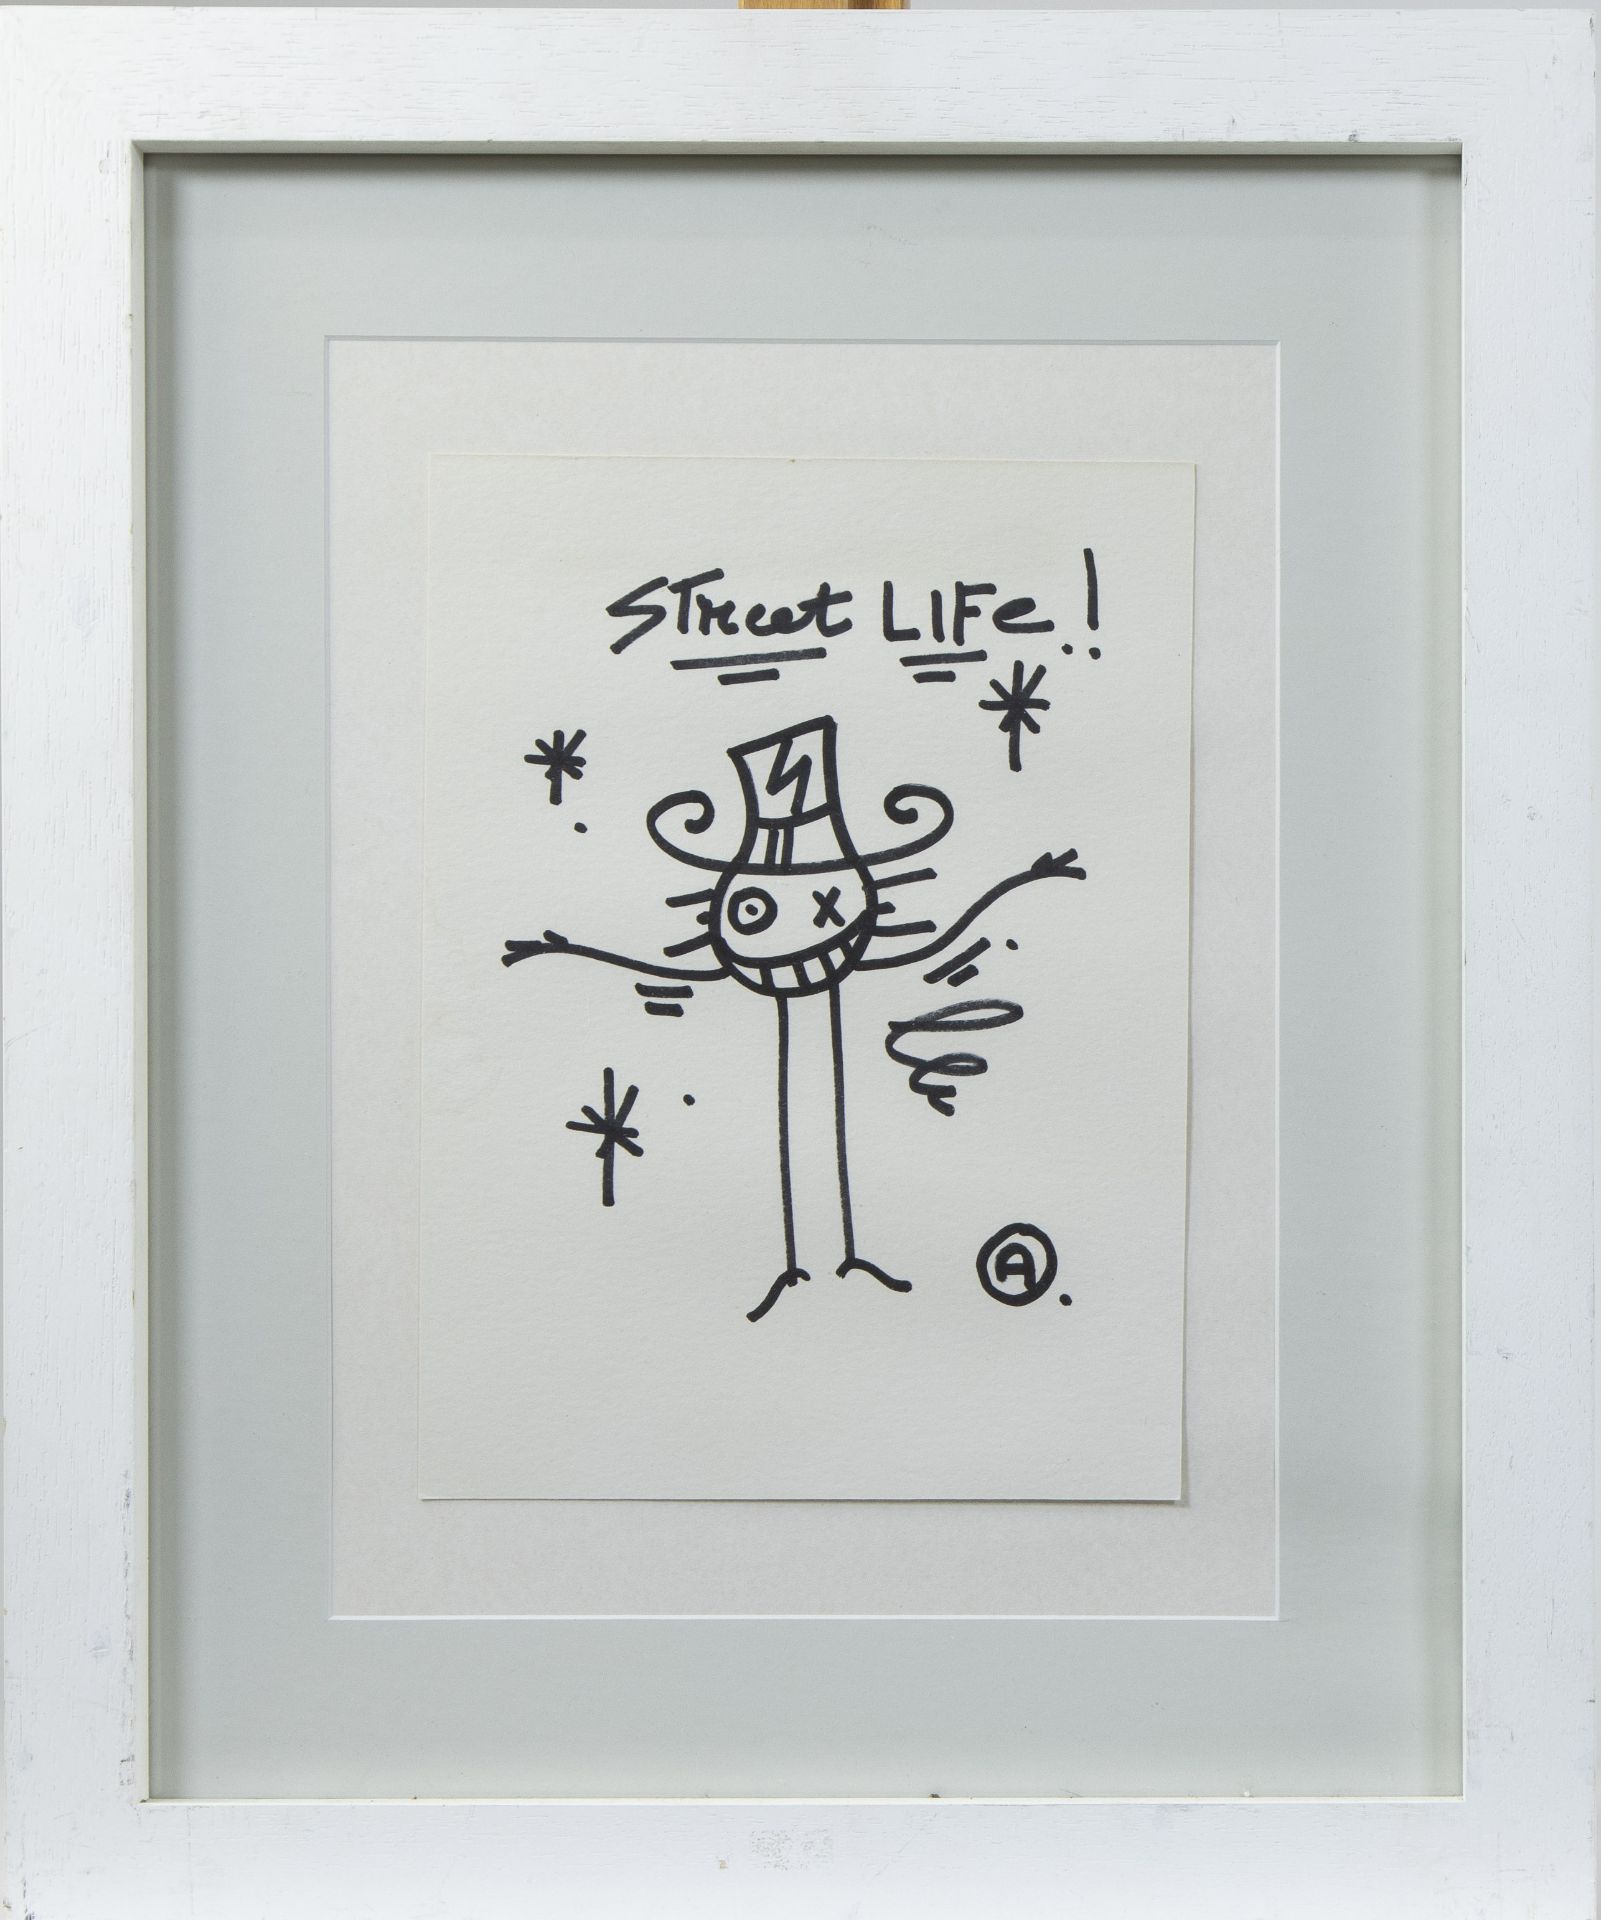 ANDRE (1971) (André SARAIVA), drawing in felt-tip pen 'Street life', monogrammed - Image 2 of 2